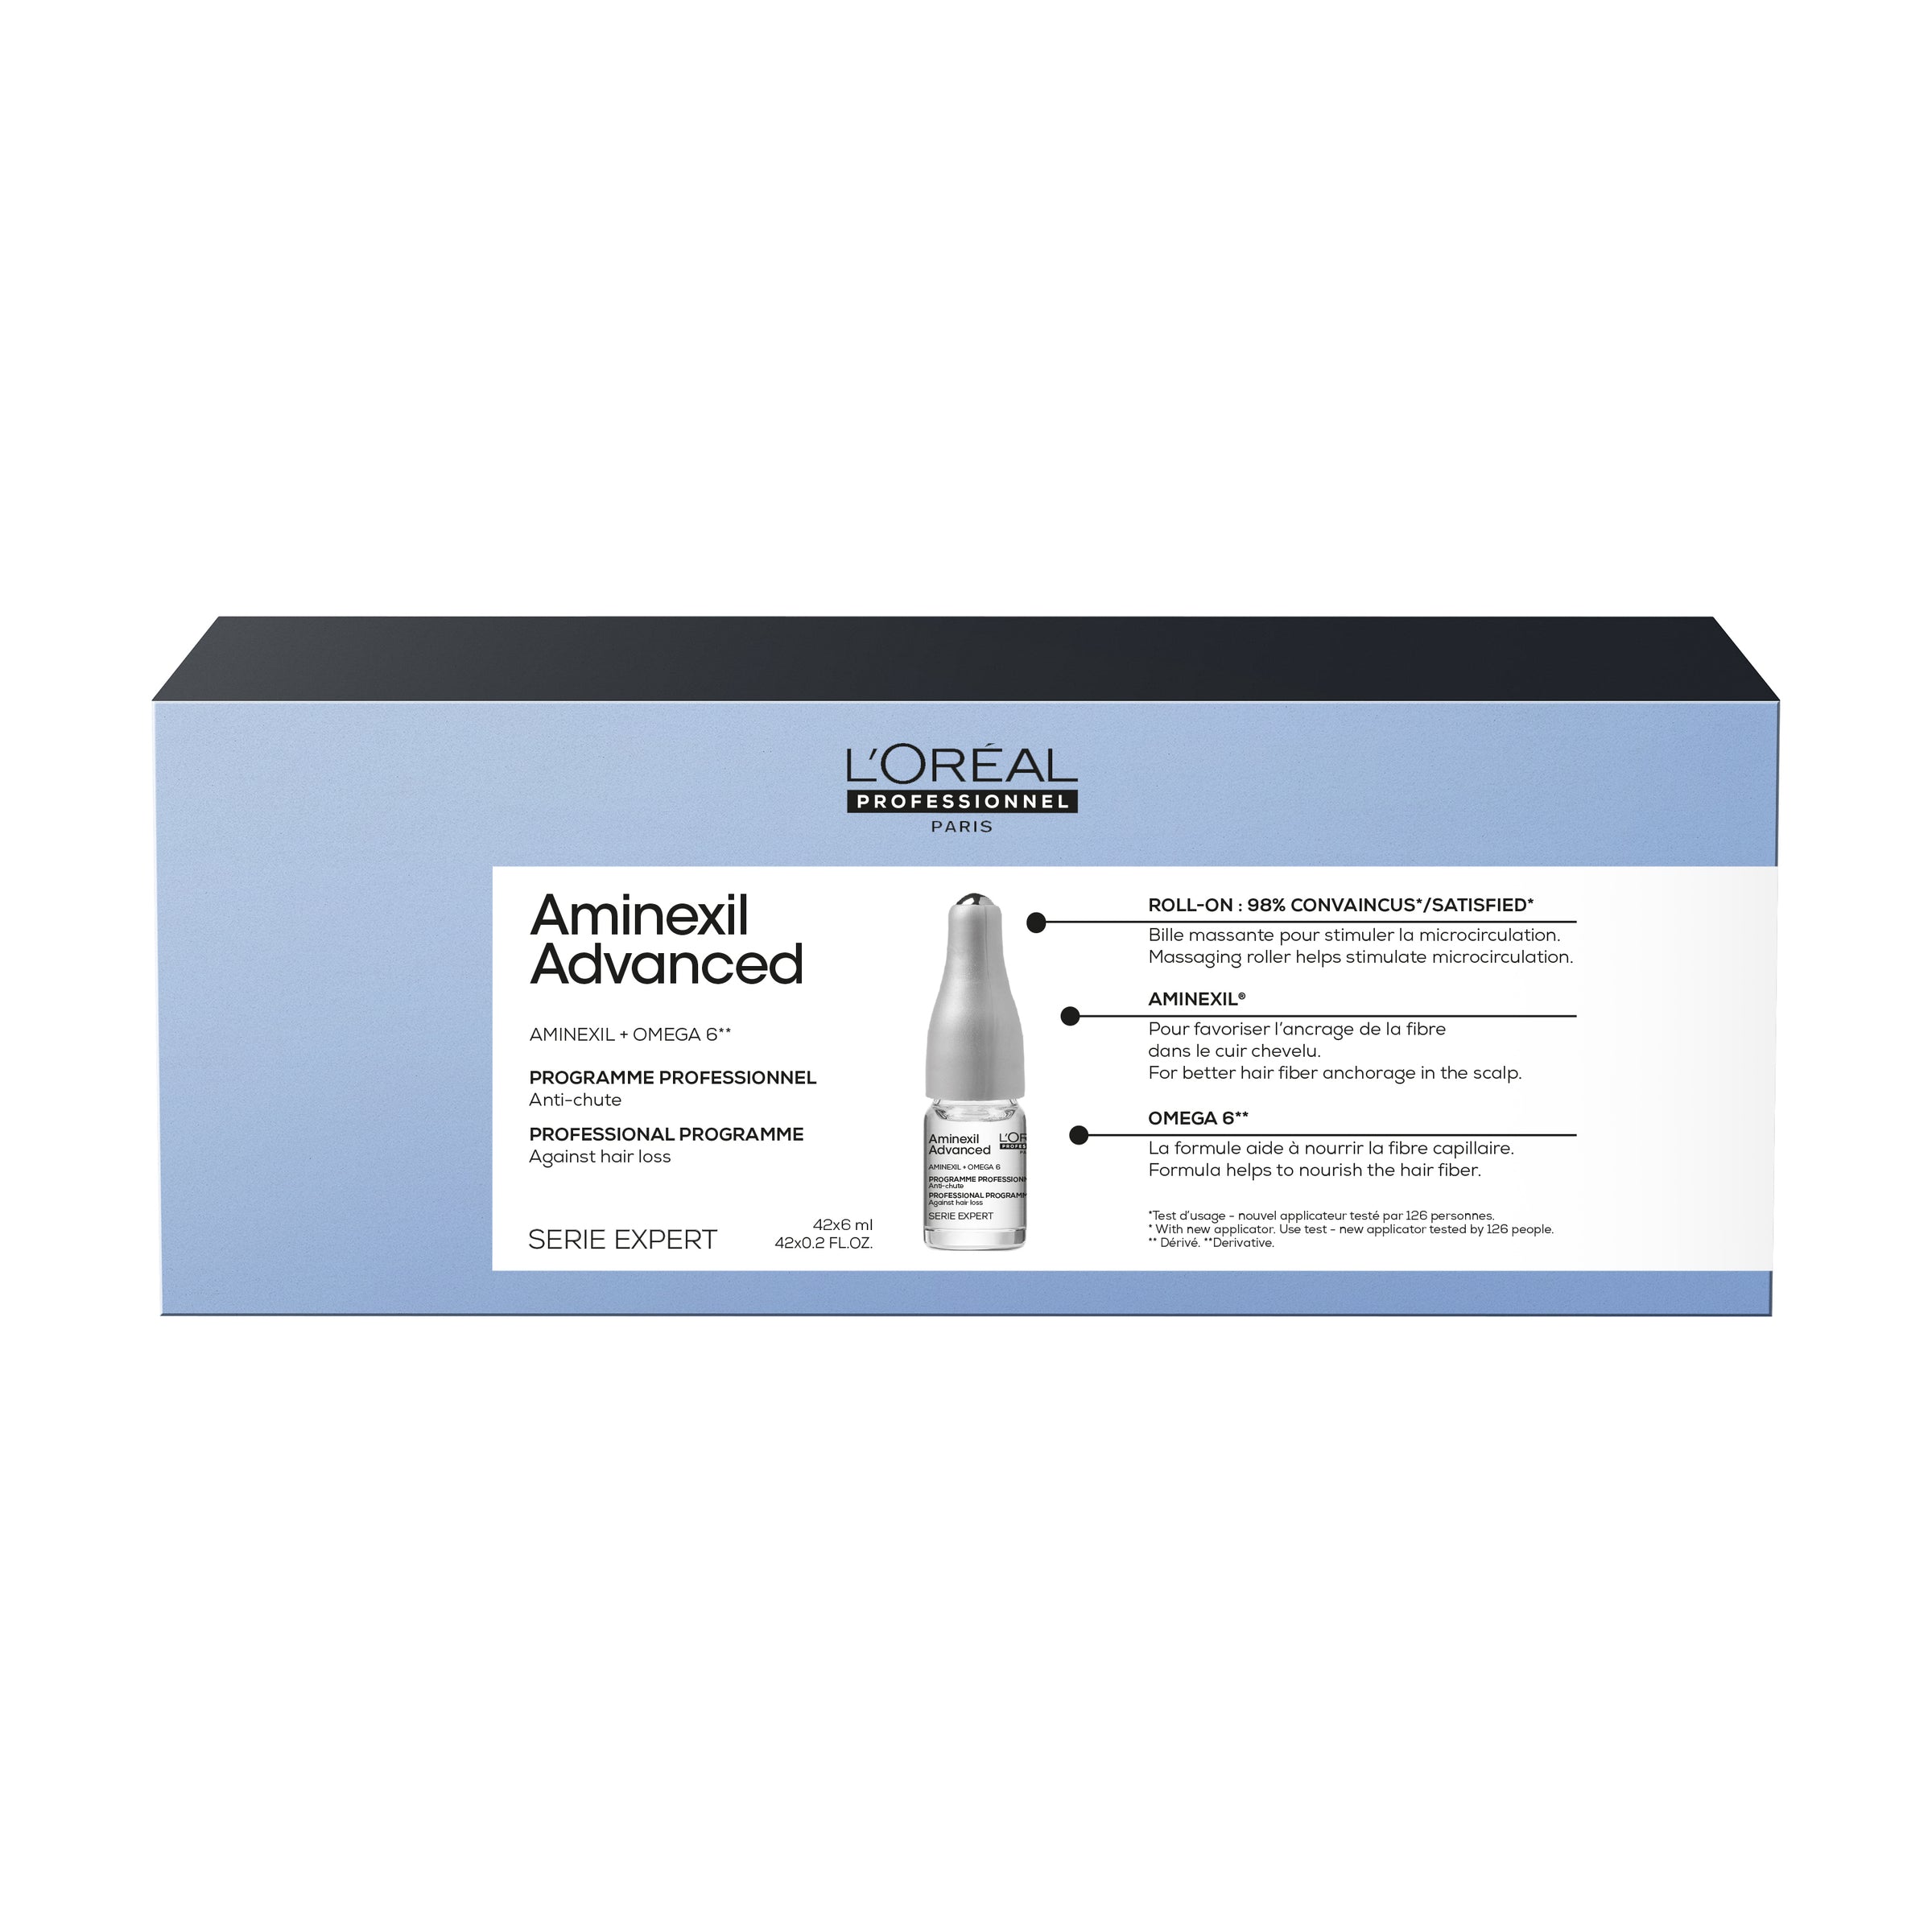 Shop The Latest Collection Of L'Oreal Professionnel Aminexil Advanced Dual-Action Scalp & Anti-Thinning Hair Treatment For Denser Looking Hair With More Body Professional 6-Week Anti-Chute Cure Serie Expert 42X6 Ml In Lebanon